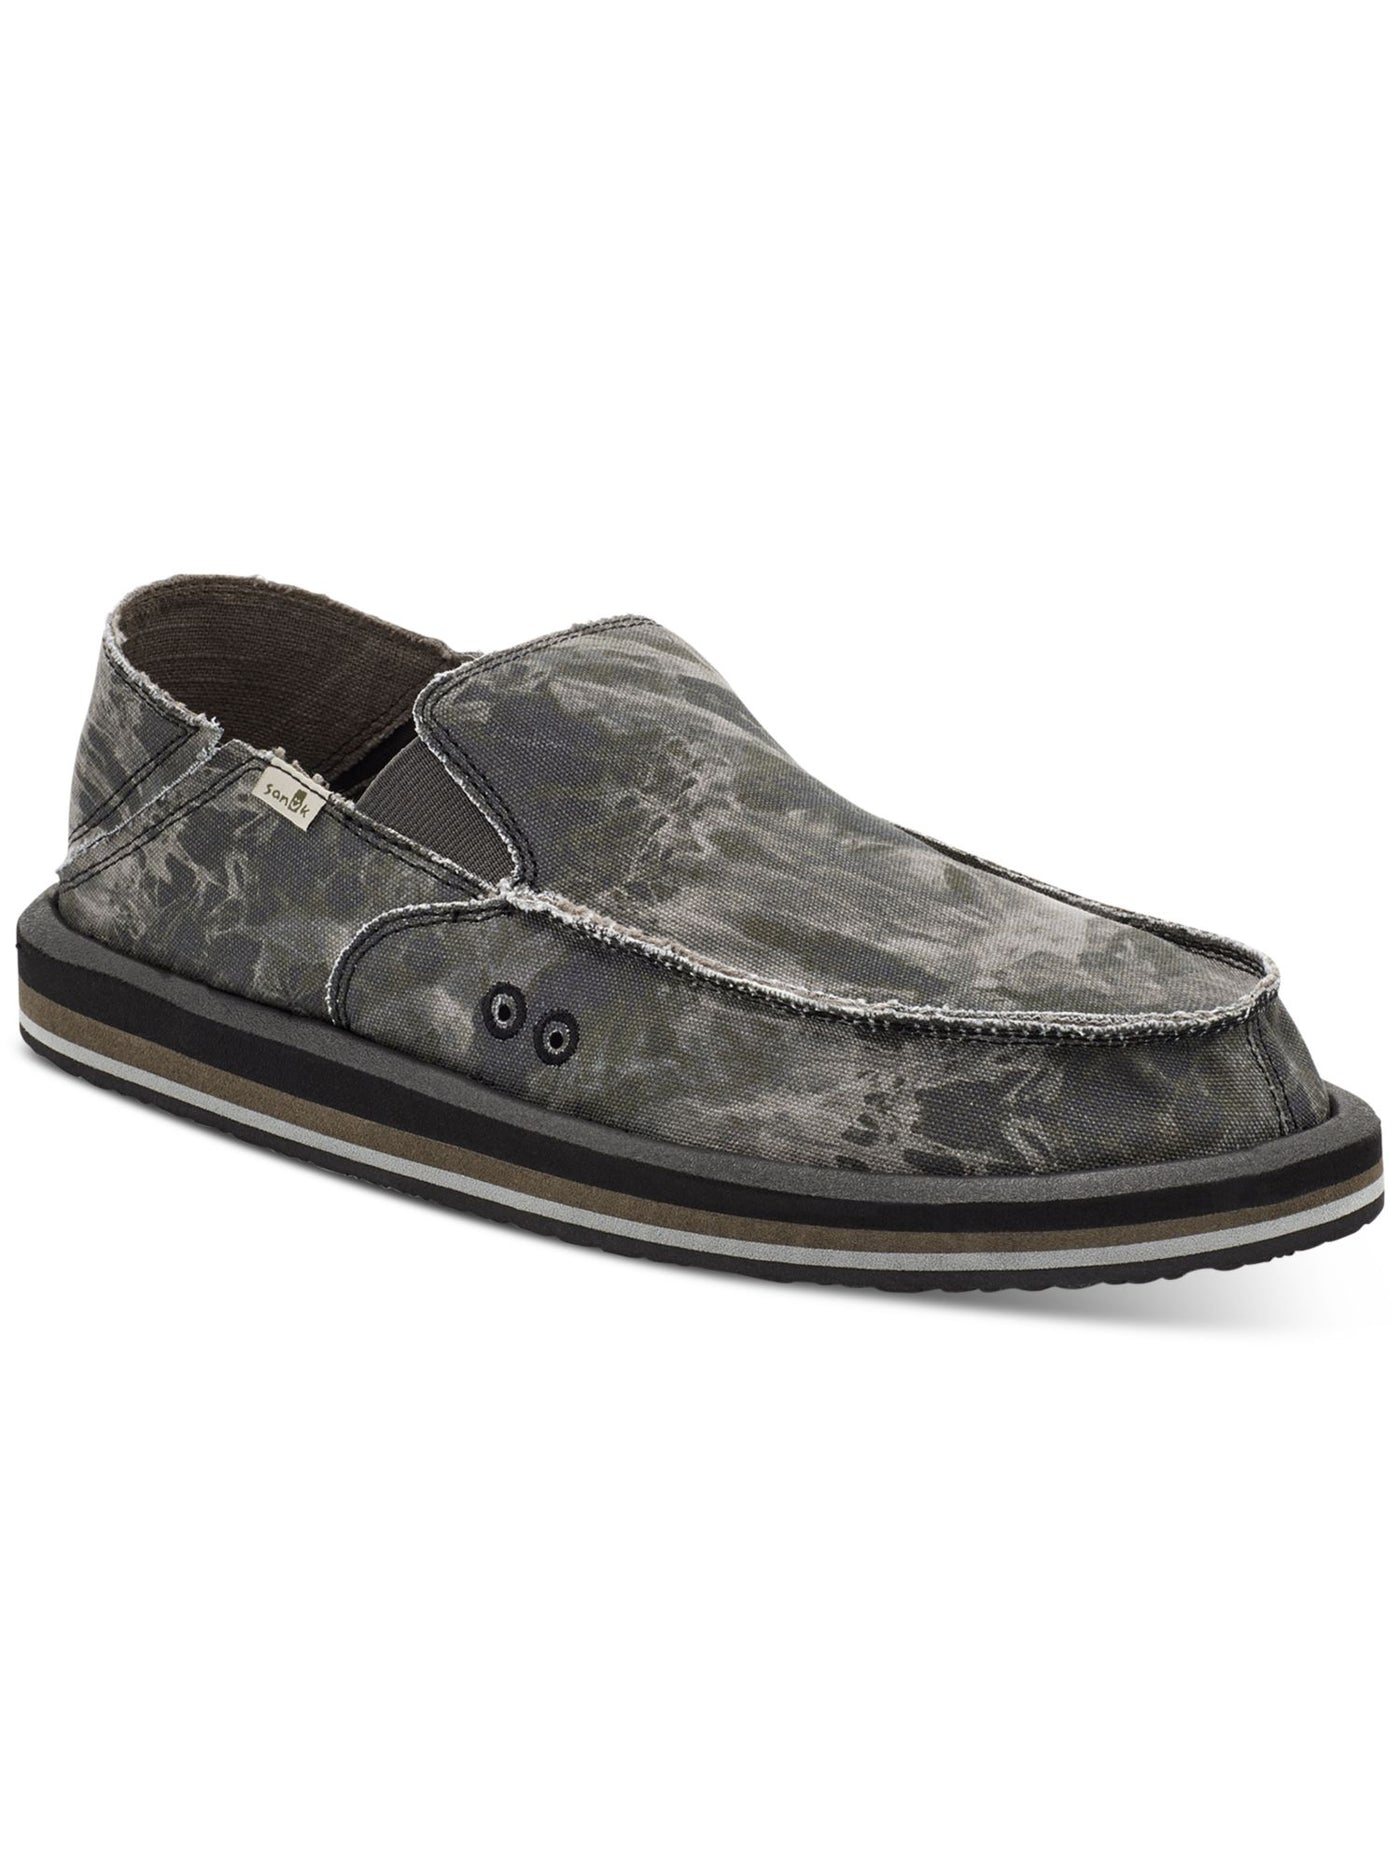 SANUK Womens Gray Tie Dye Cushioned Vagabond Round Toe Slip On Loafers Shoes 7